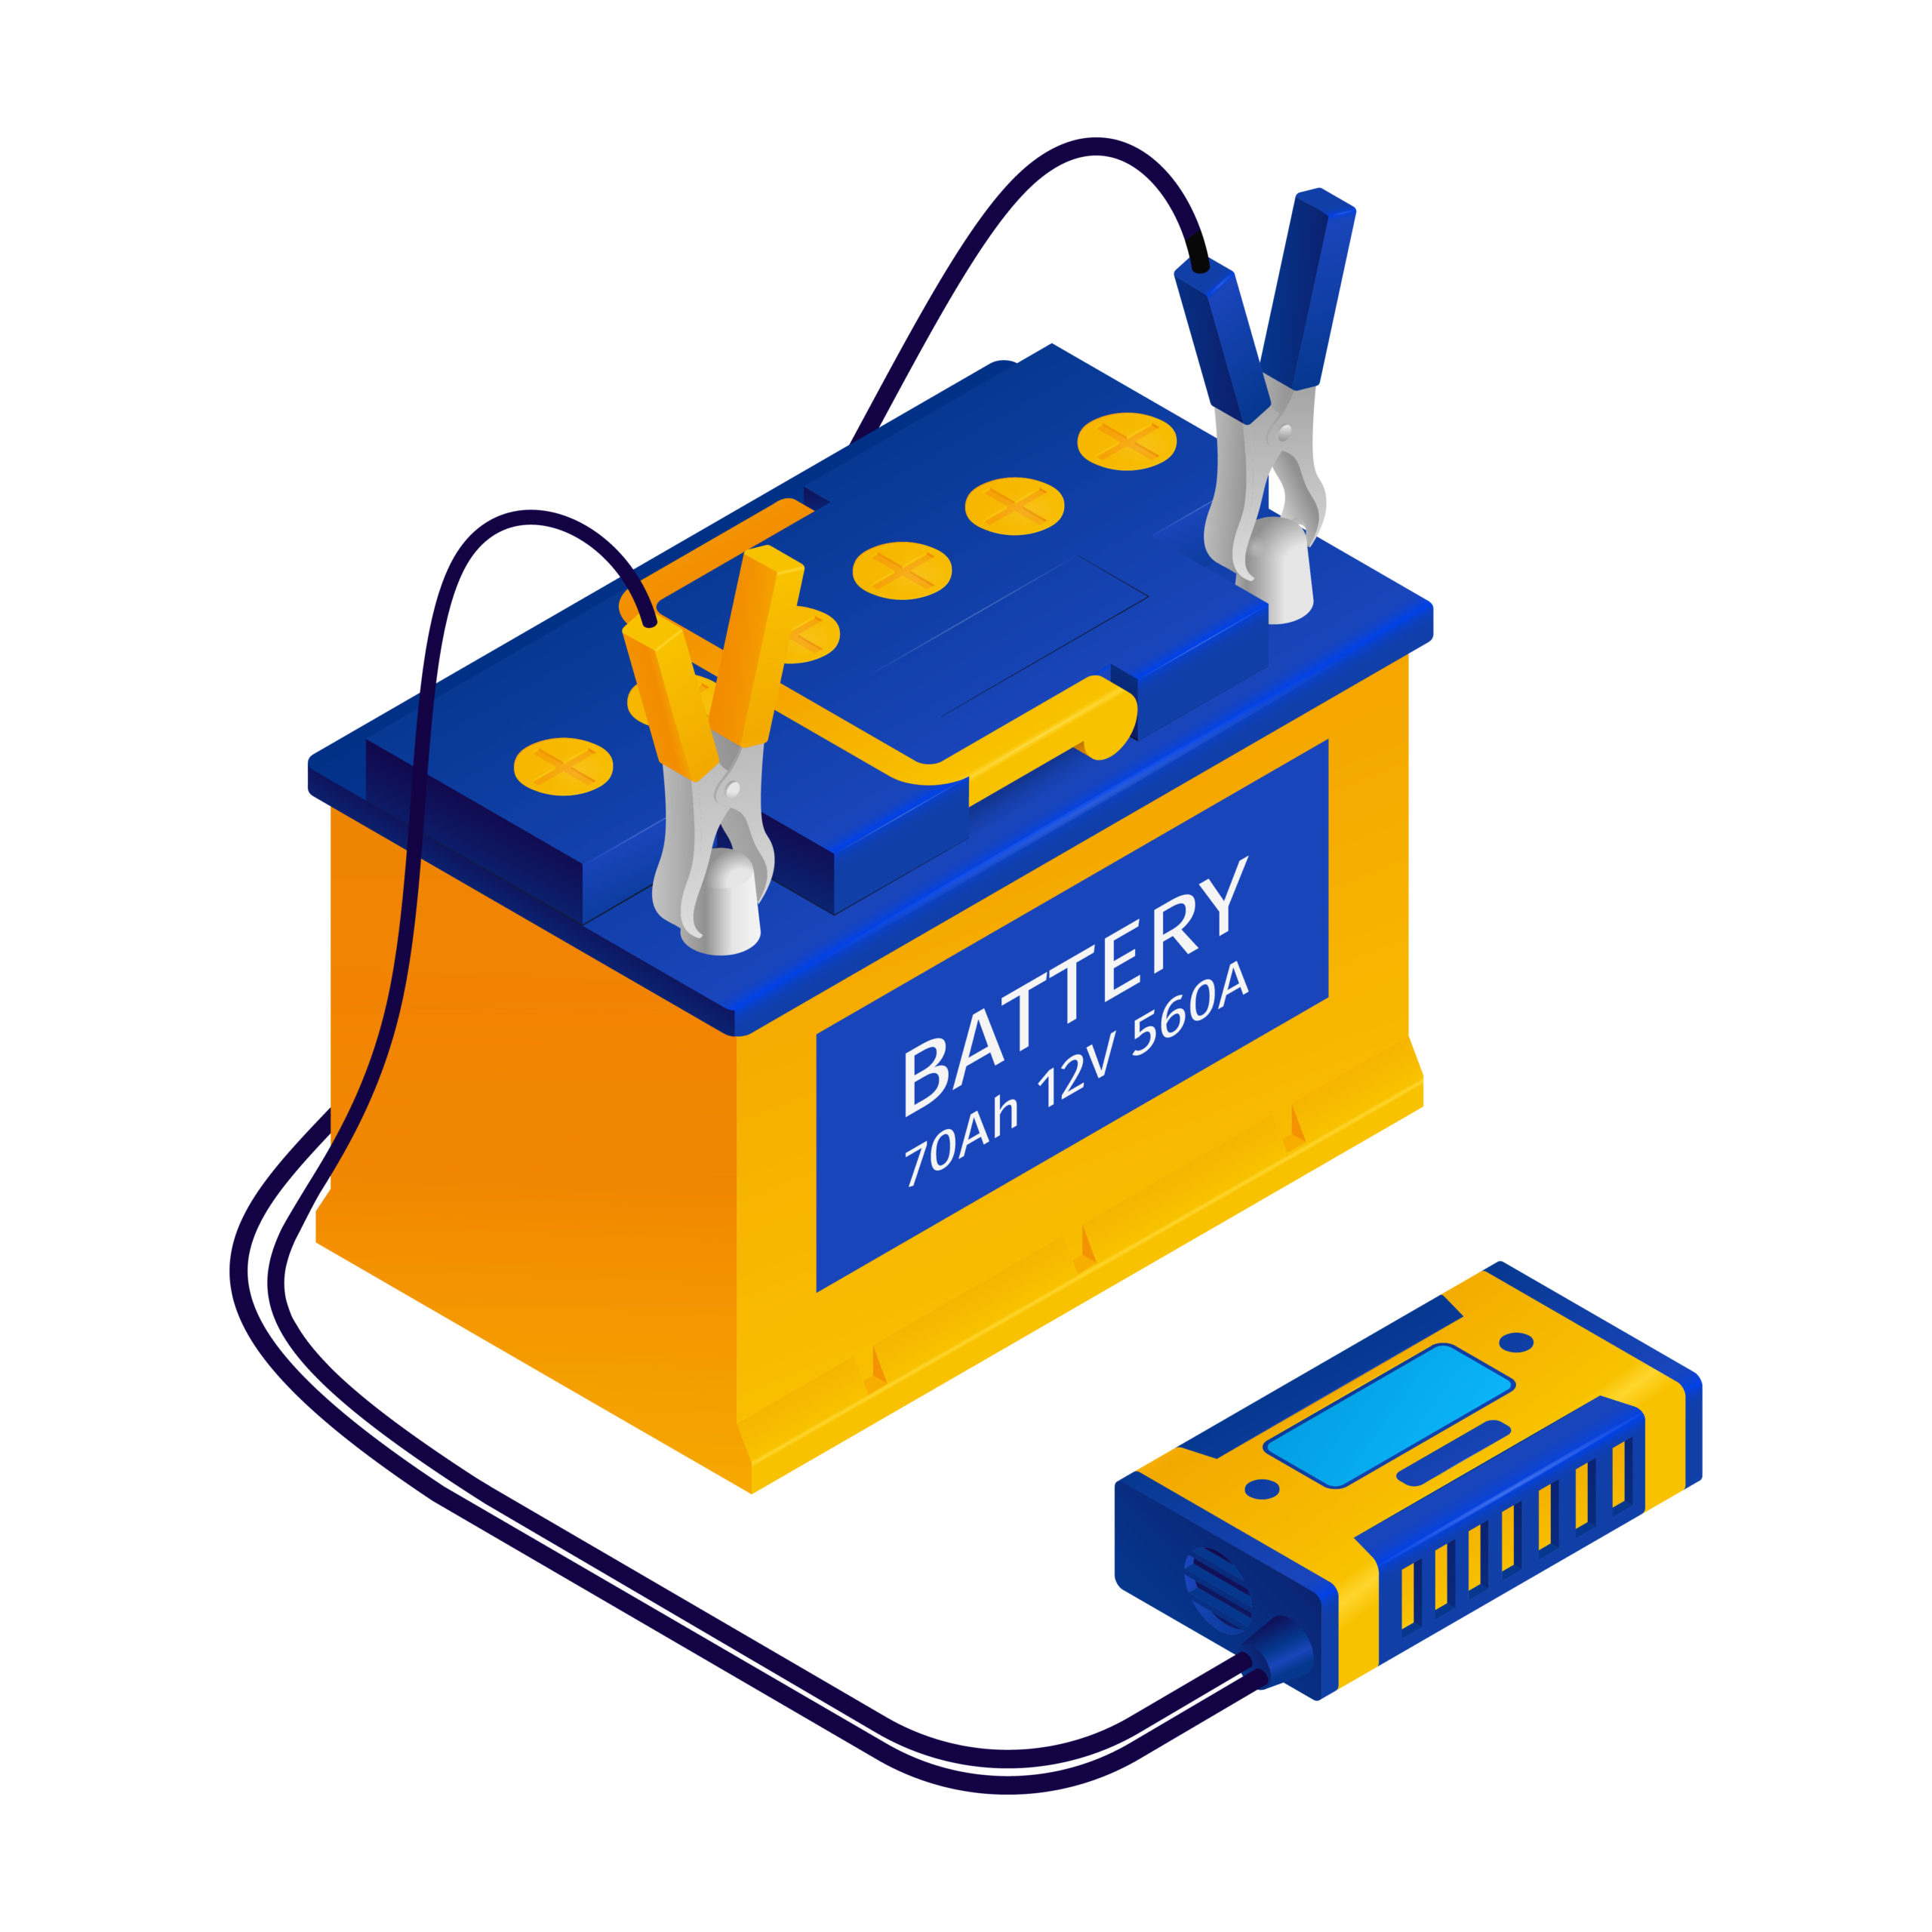 What Is an SLI Battery?